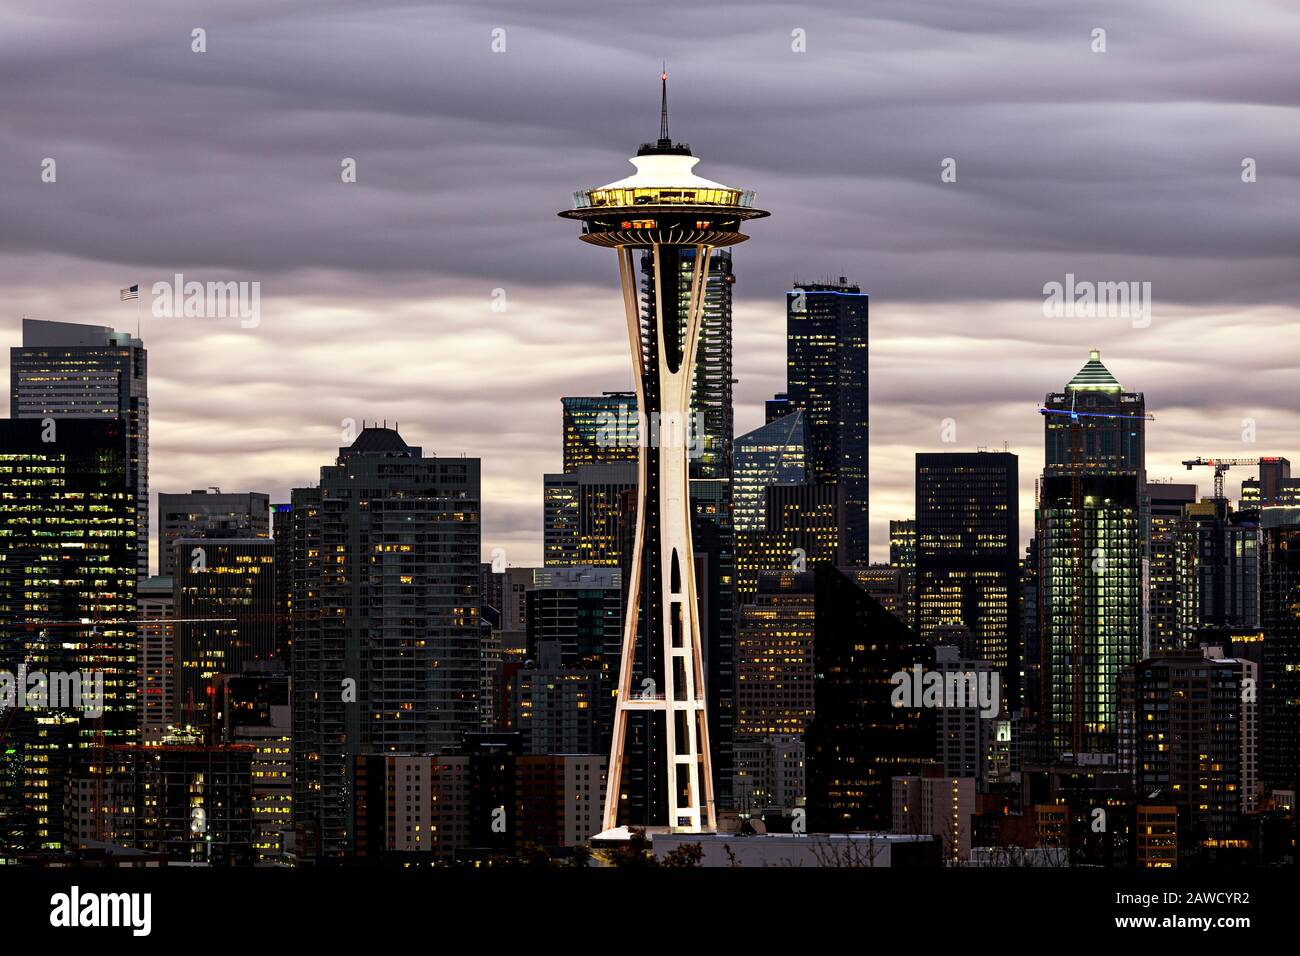 WA17382-00...WASHINGTON - Seattle skyscrapers and the Space Needle viewed from Kerry Park on Queen Ann Hill. Stock Photo